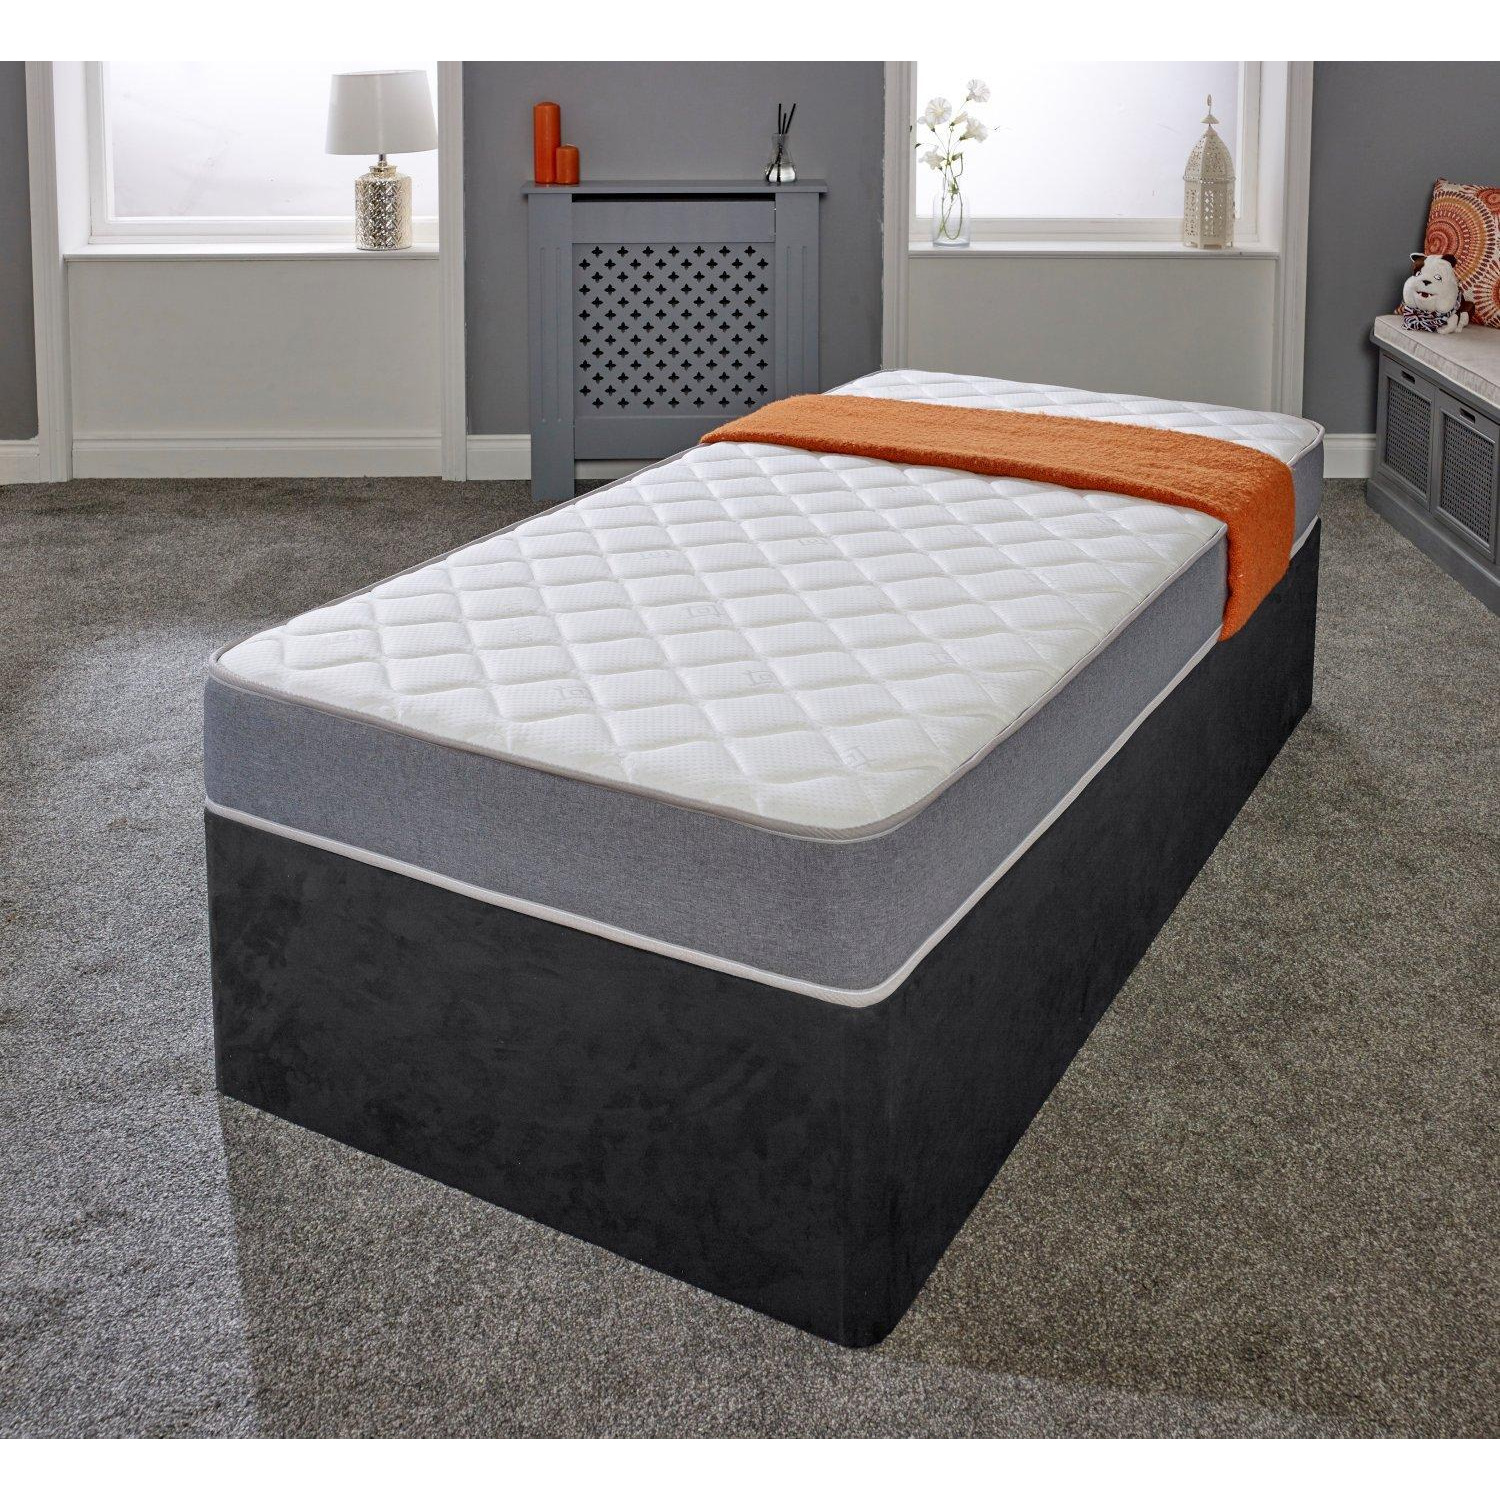 Cooltouch Essentials Grey Memory Foam Hybrid Spring Mattress - image 1